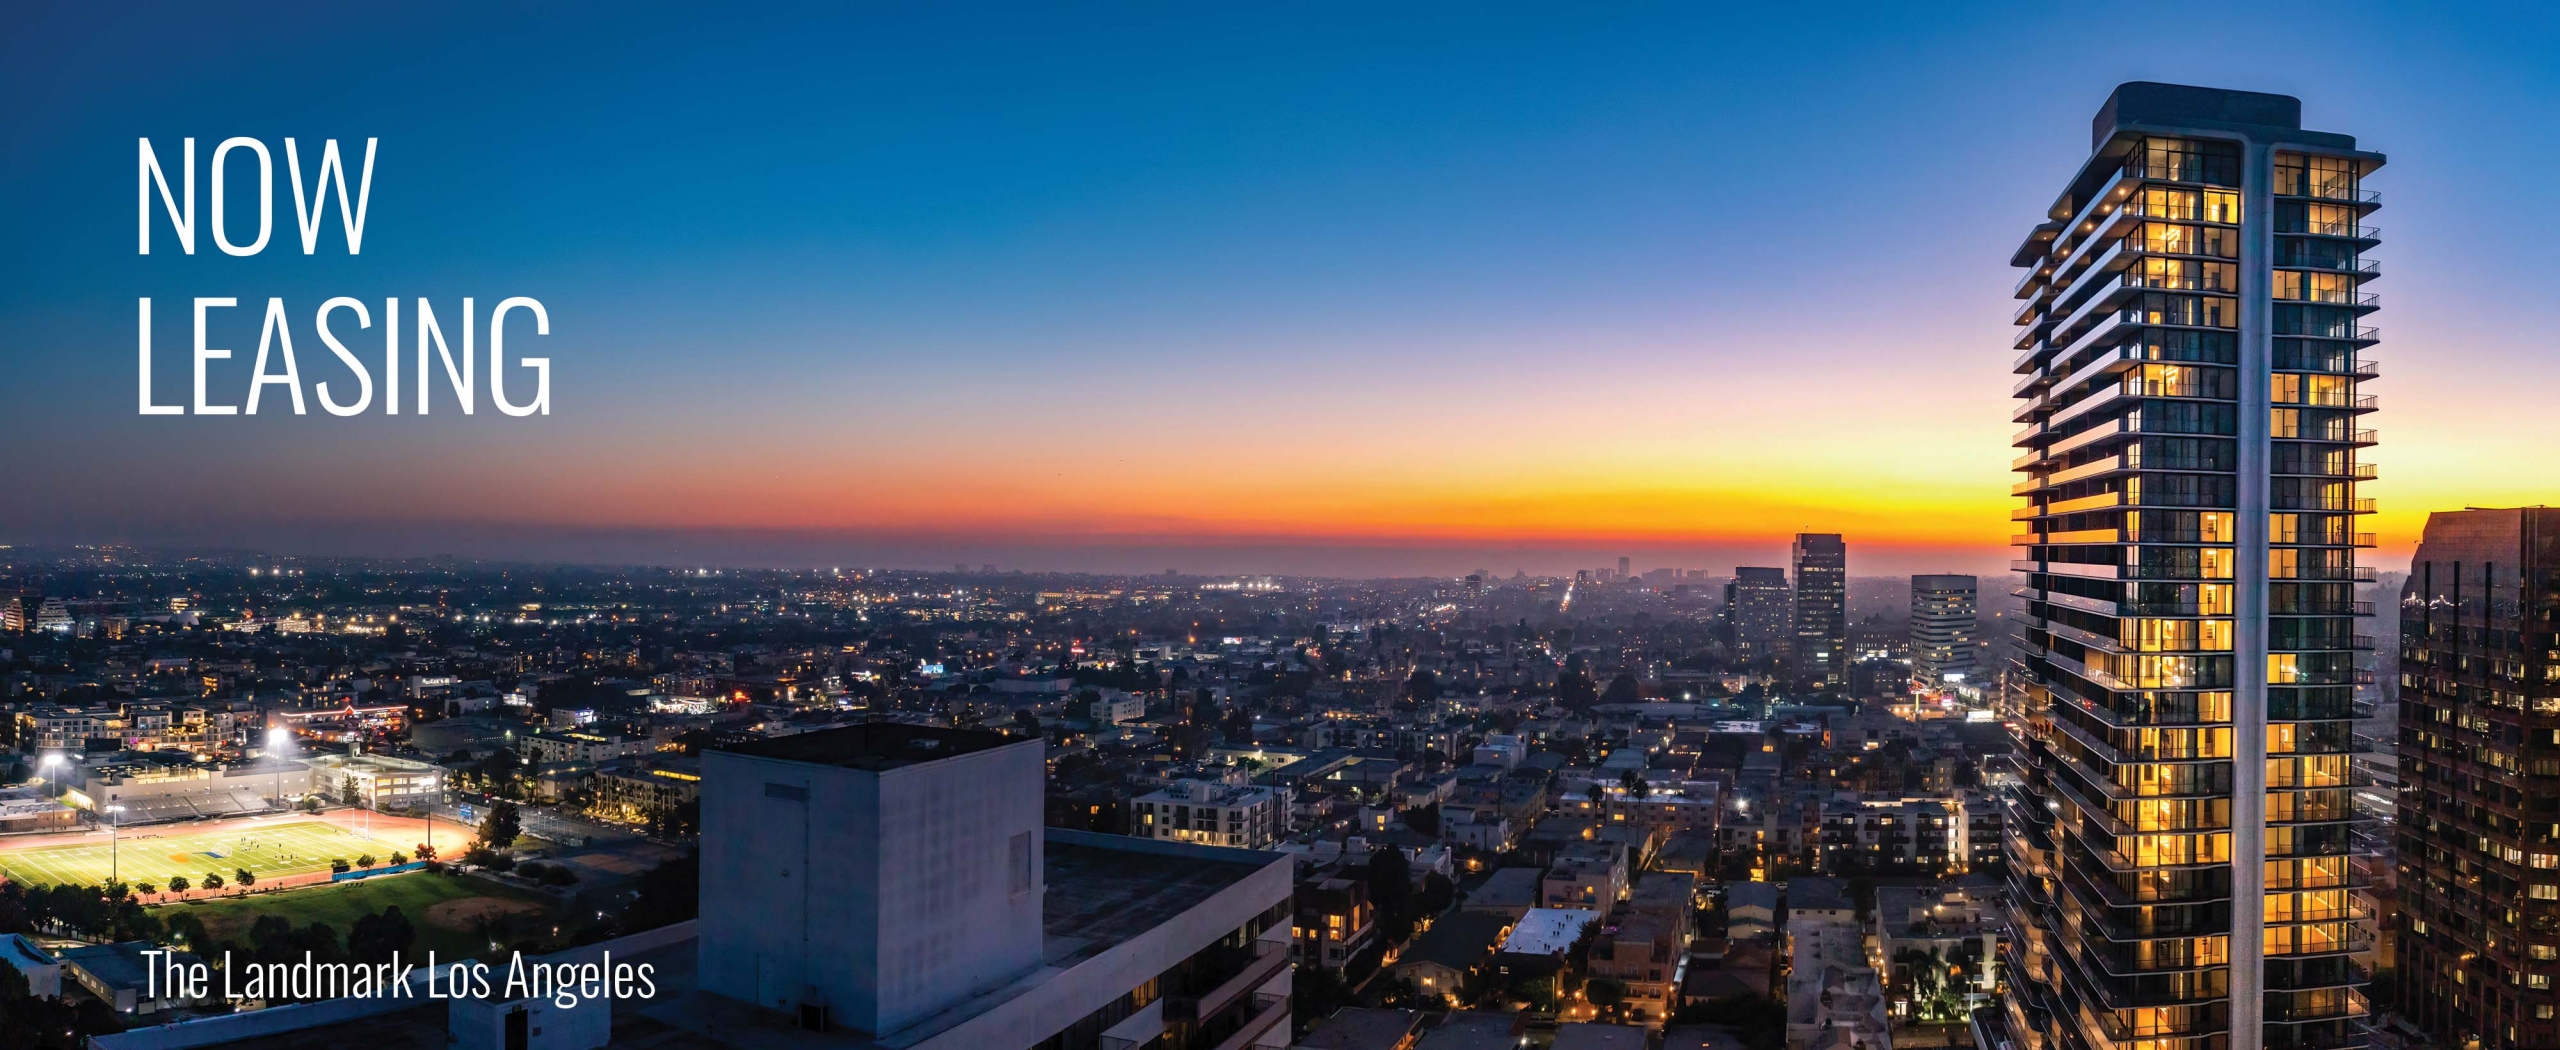 The Landmark Los Angeles at Sunset - NOW LEASING